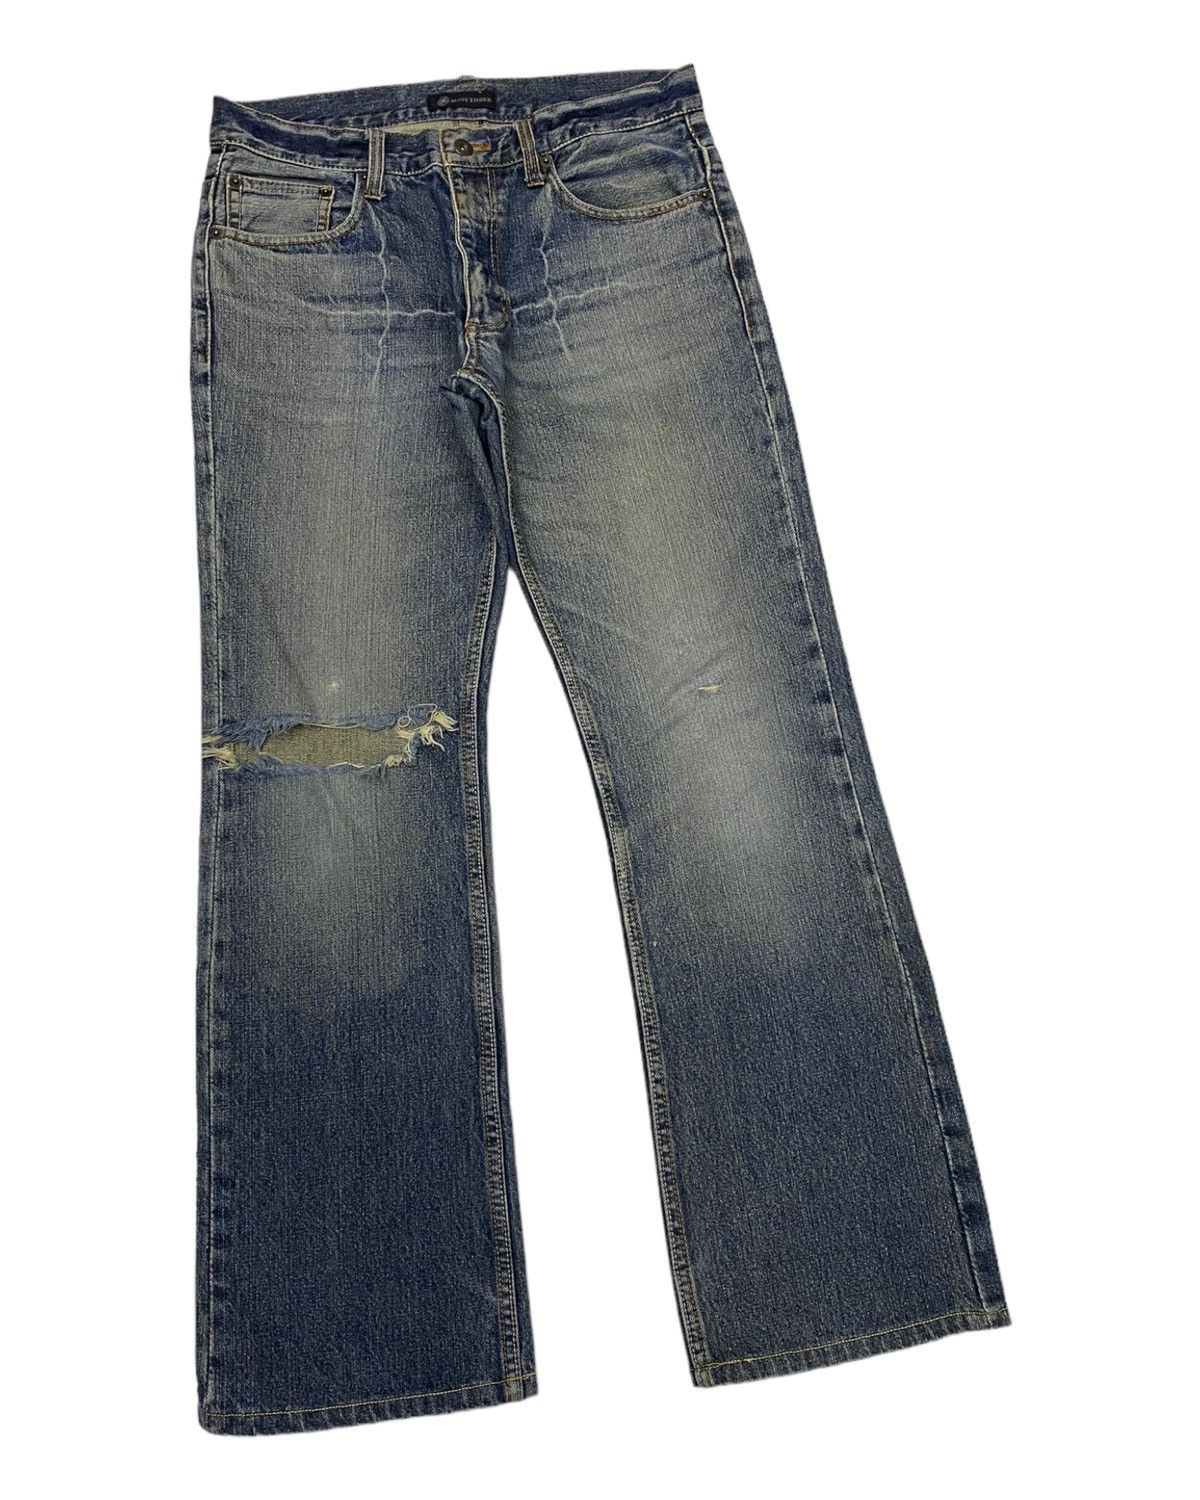 Archival Clothing - FLARED🔥ROOT THREE DISTRESSED DENIM JEANS - 3